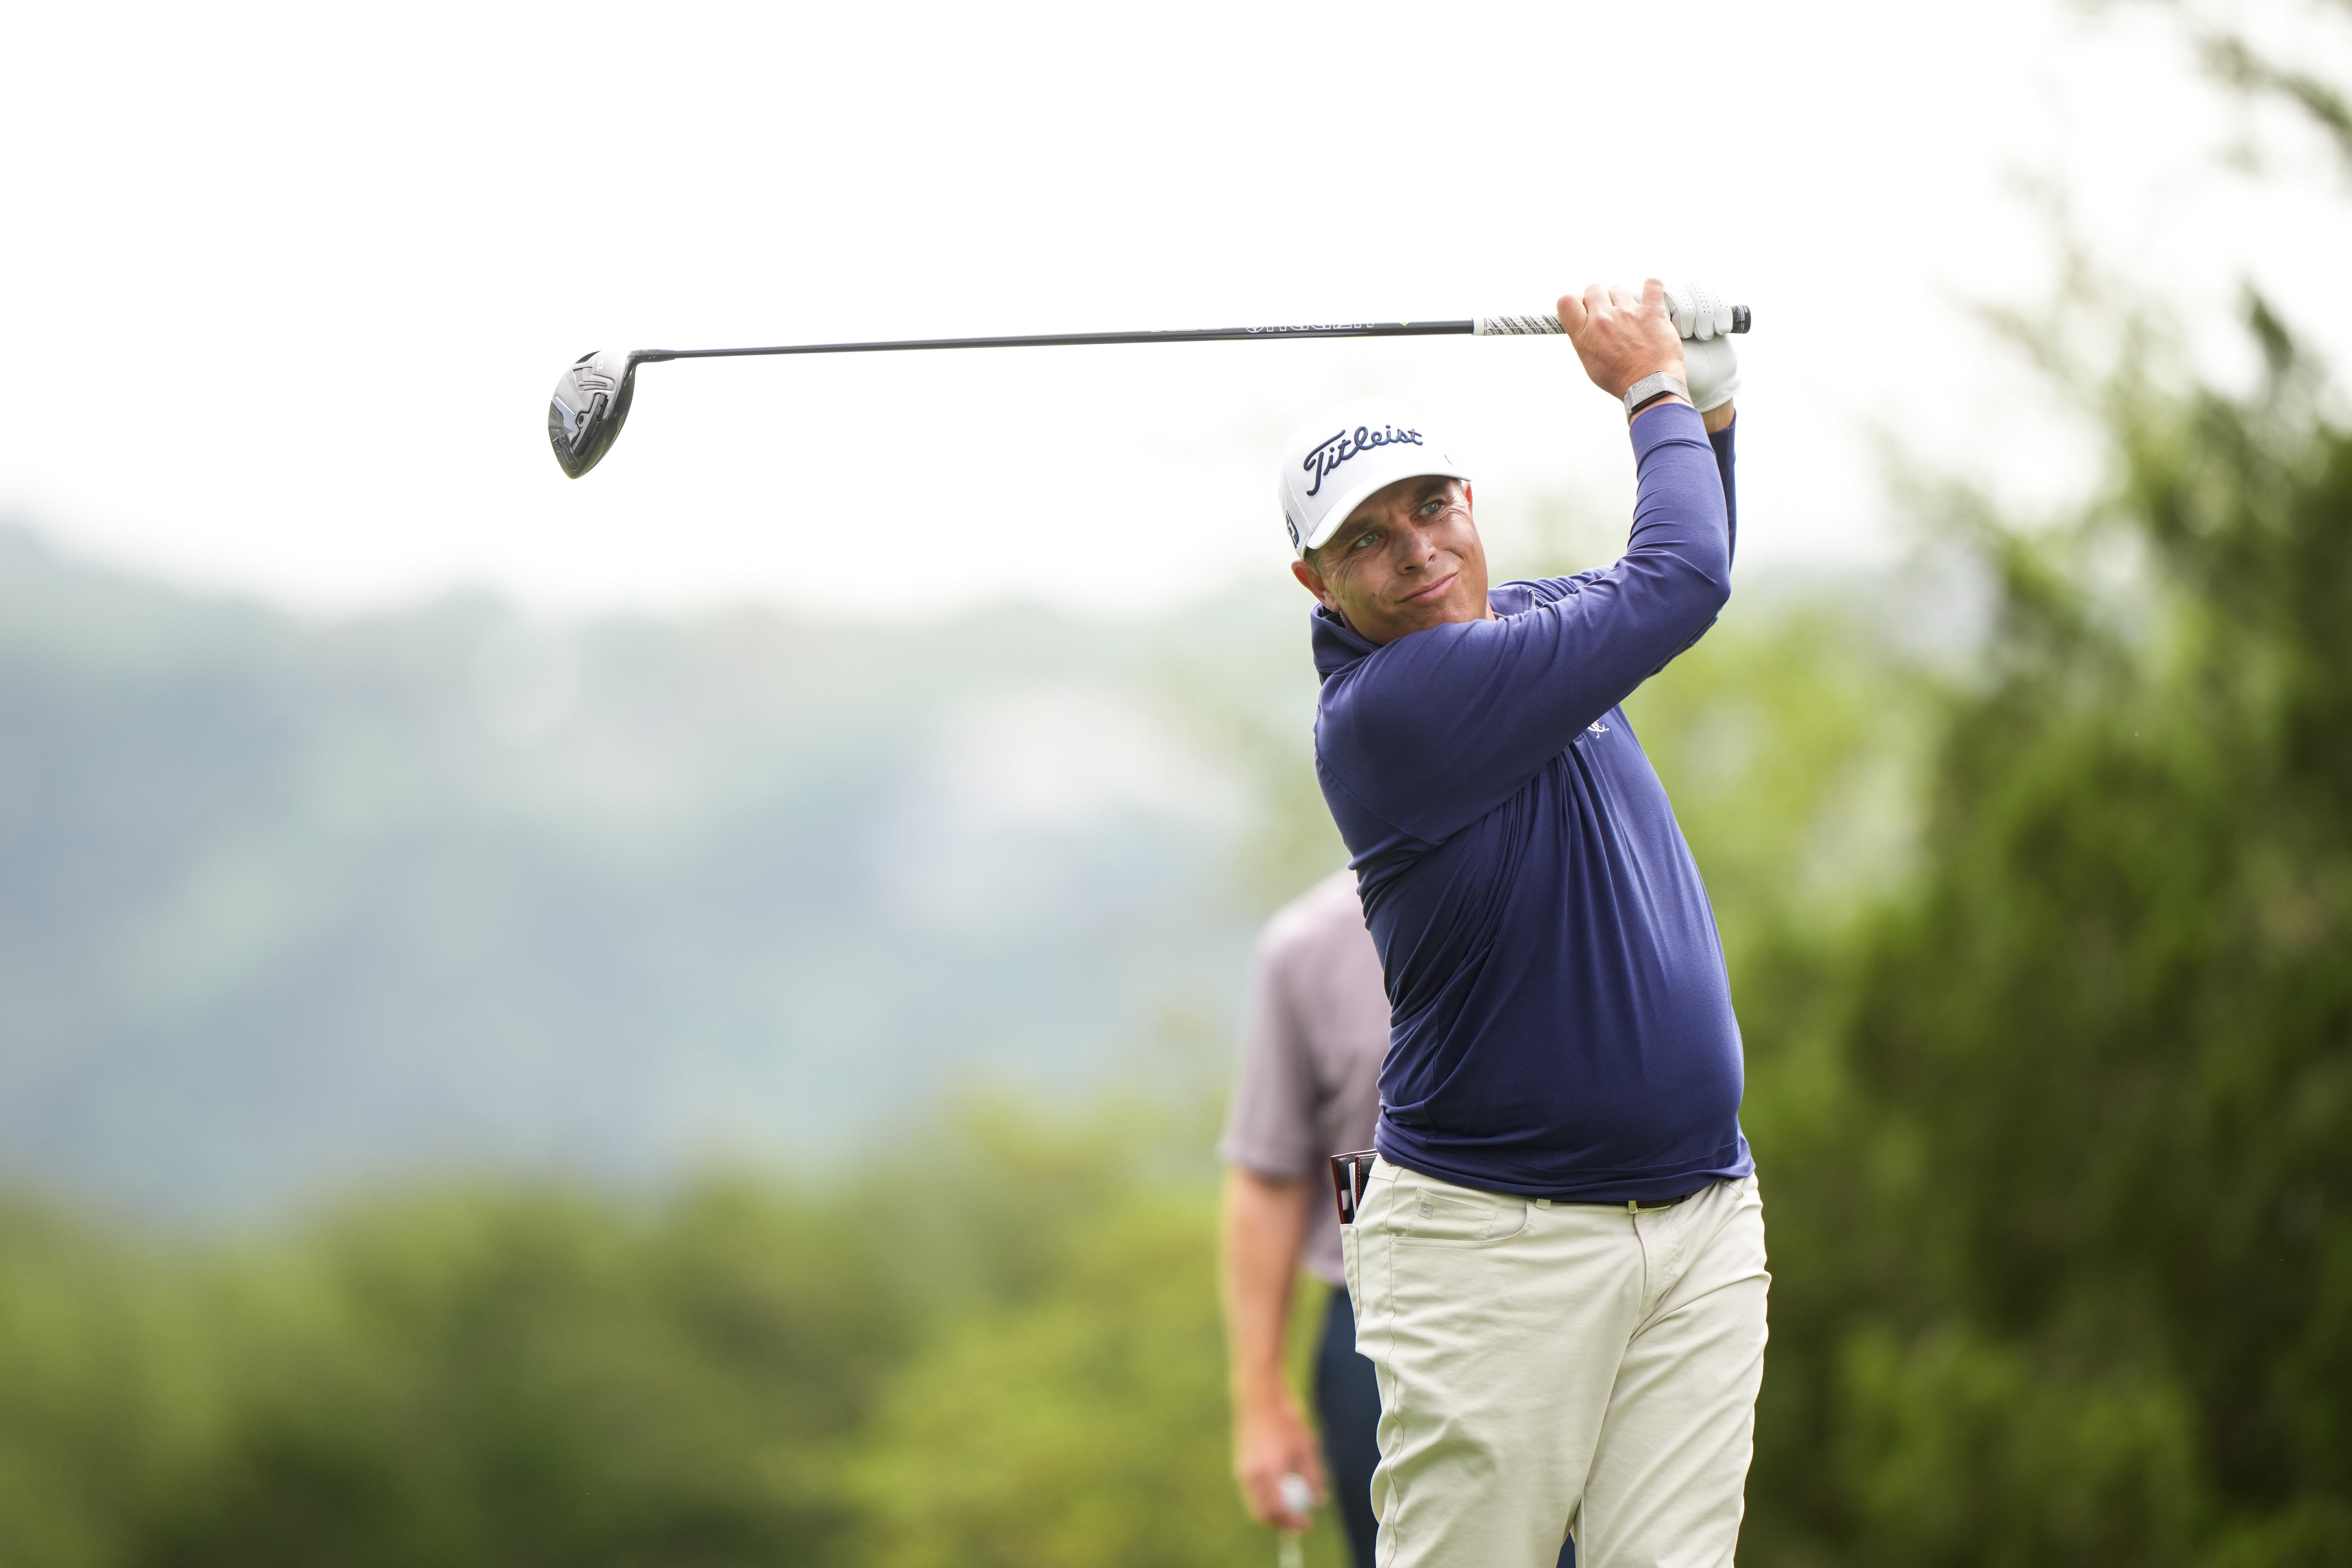 Jason Martin, PGA, hits his shot from the second tee during the third round of the 54th PGA Professional Championship at Omni Barton Creek in Austin, Texas.